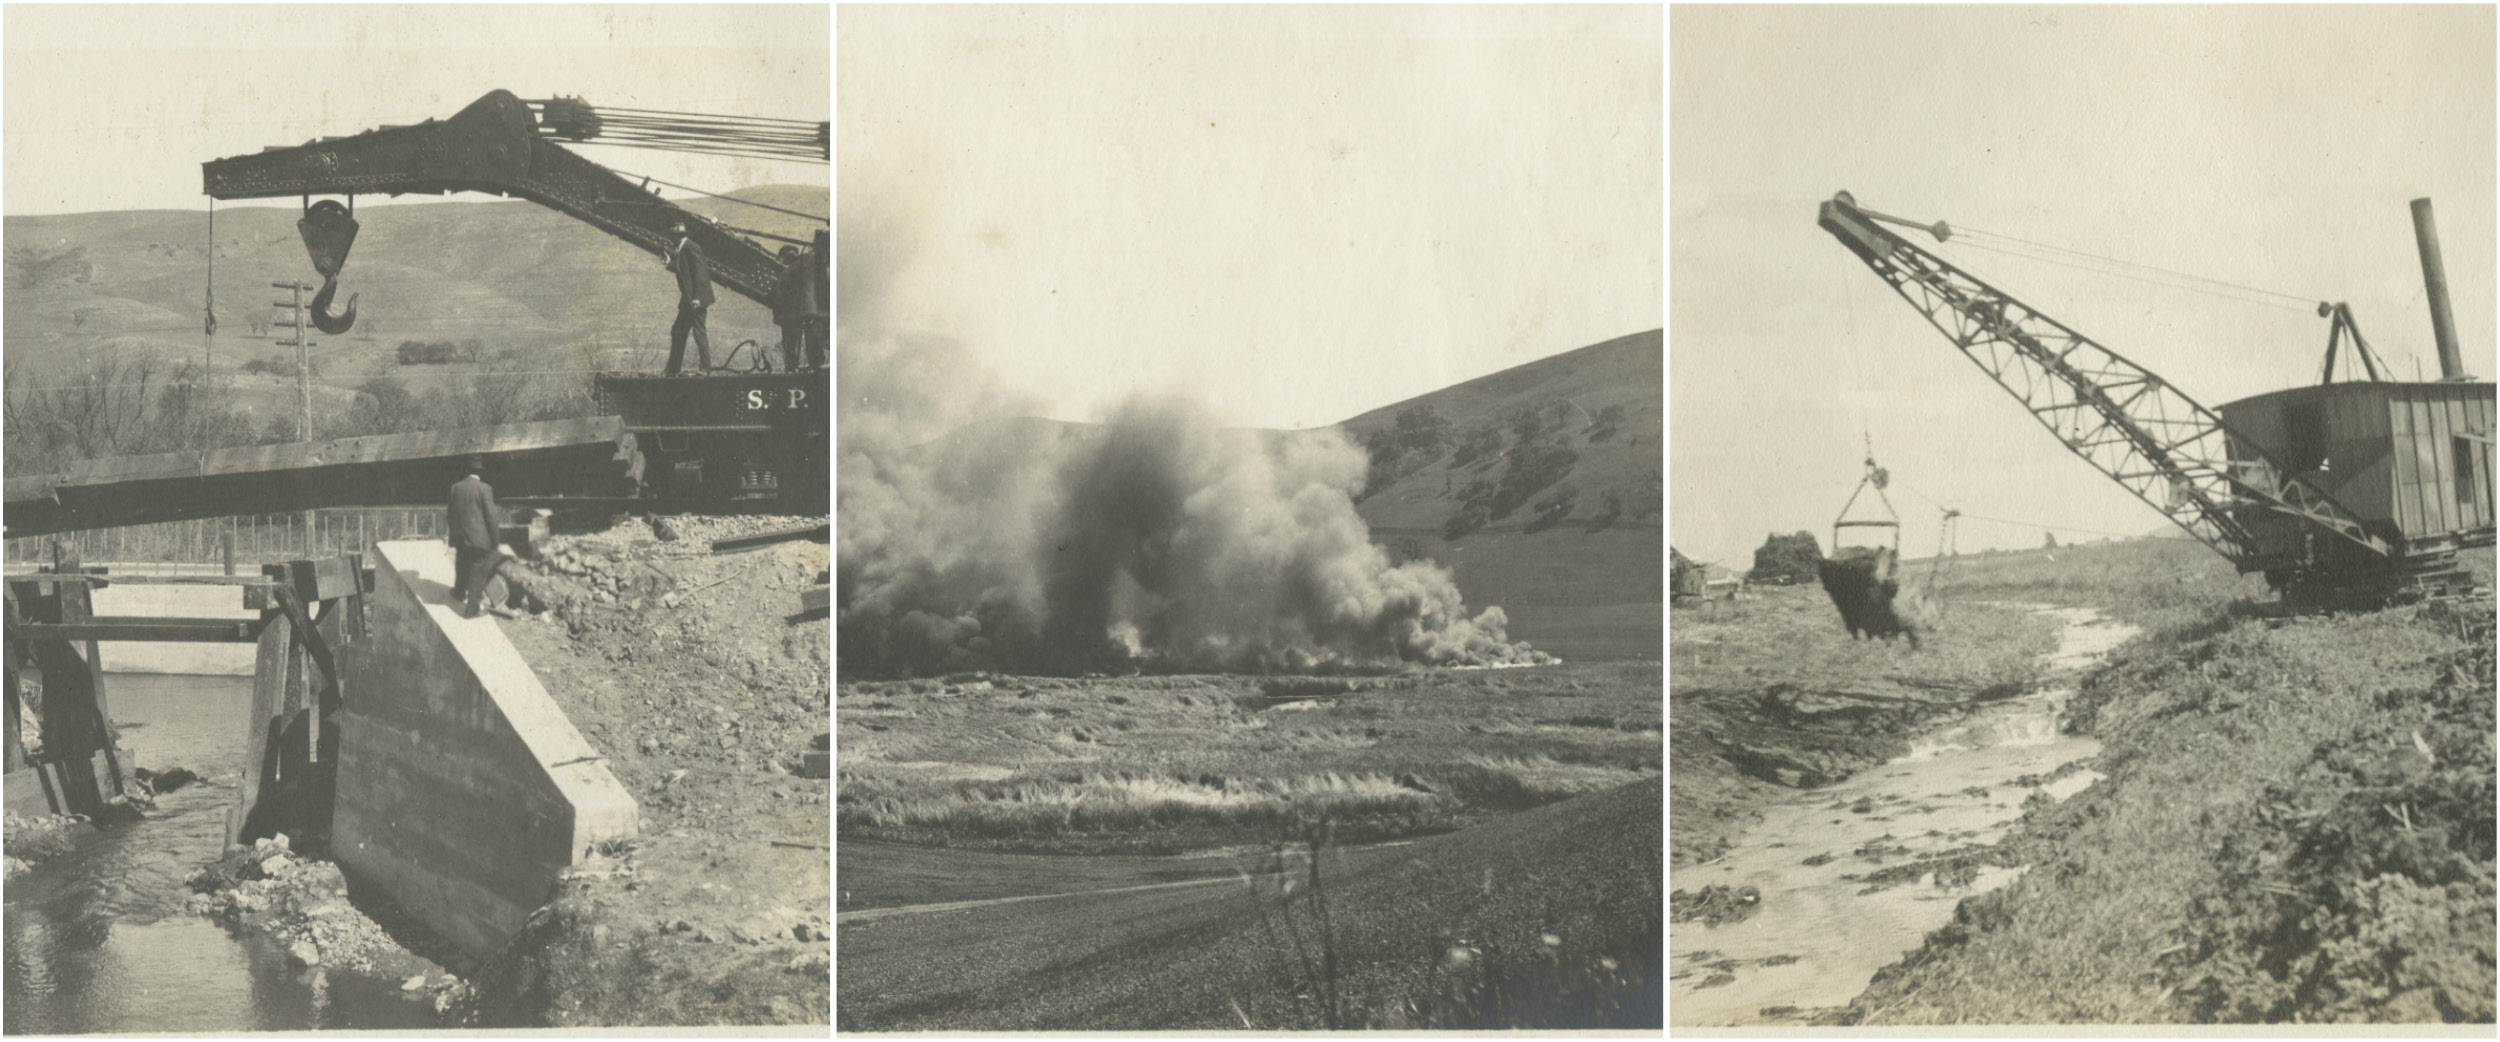 Historic photos of the destructive tactics used during the 1916 reclamation of the Laguna Seca